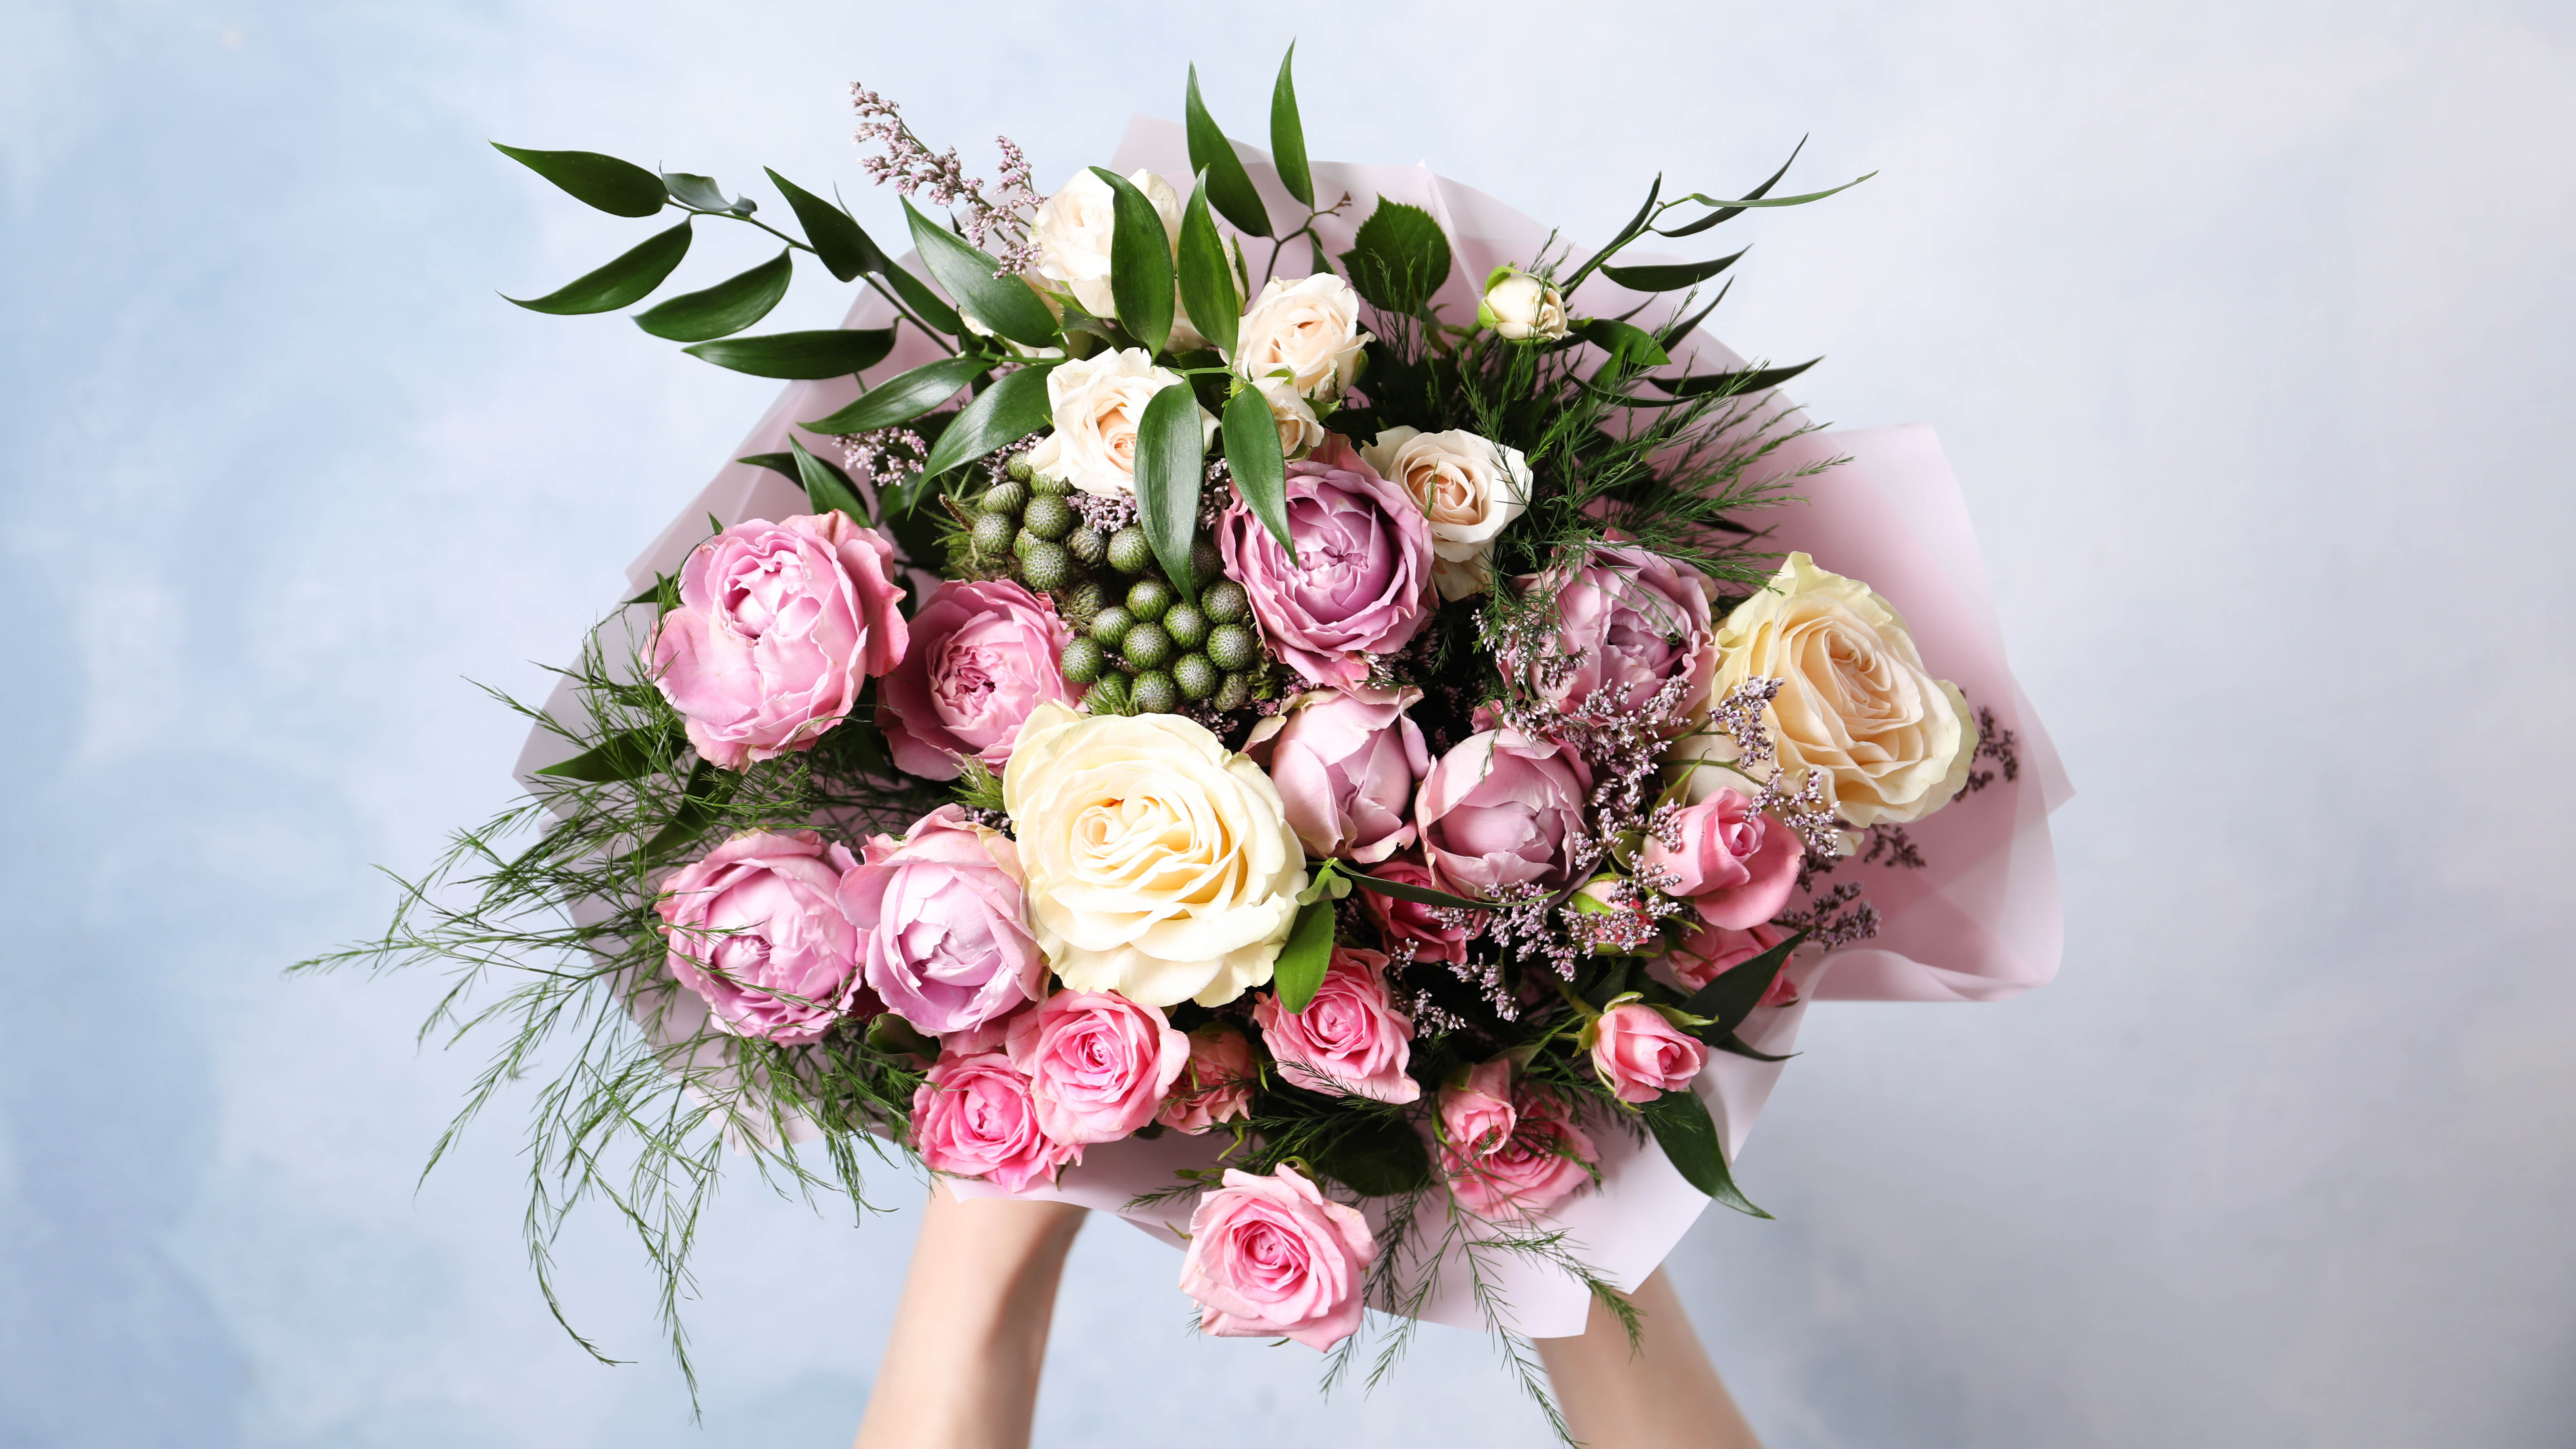 7 ways to keep your Mother's Day flowers fresh and long lasting — expert tips